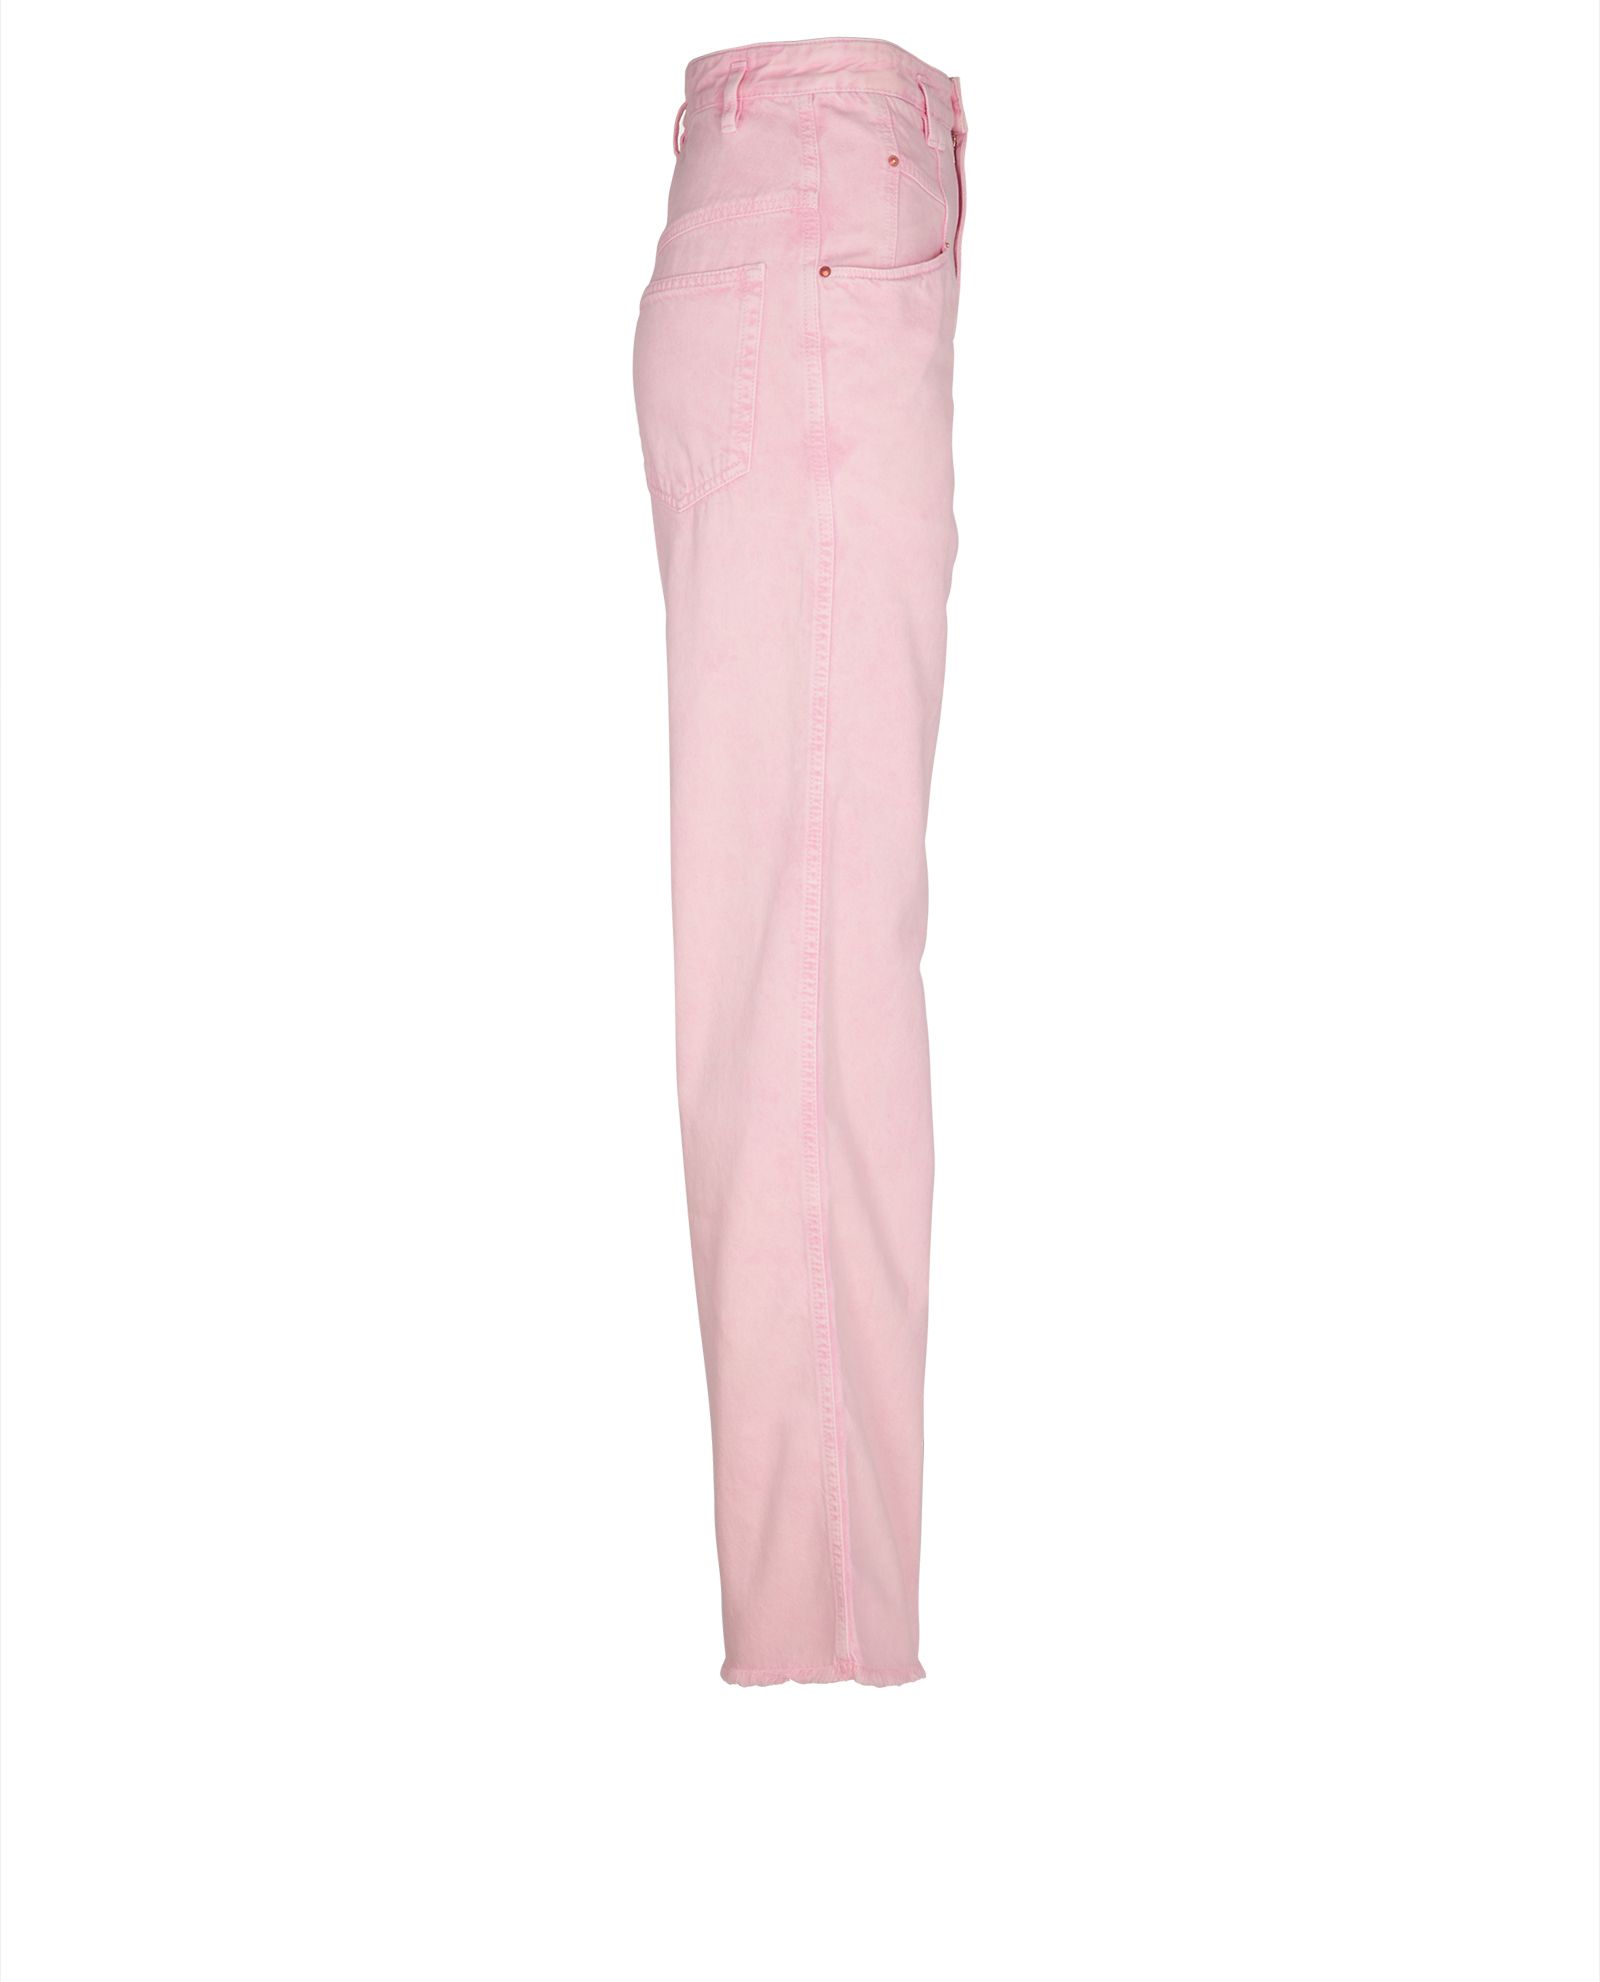 Loose Straight High Jeans - Light pink - Ladies